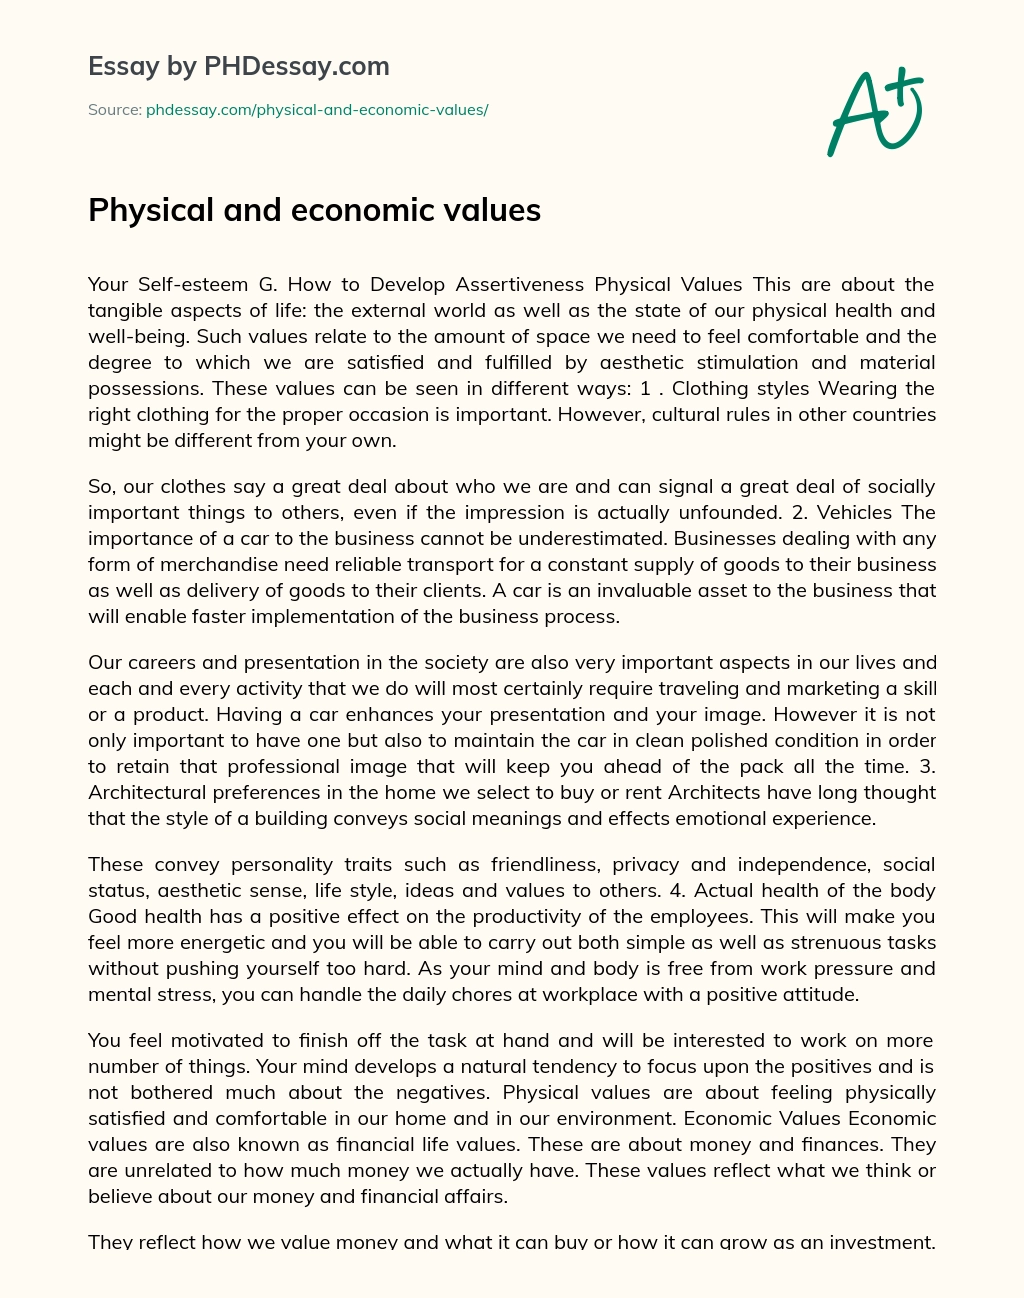 Physical and economic values essay